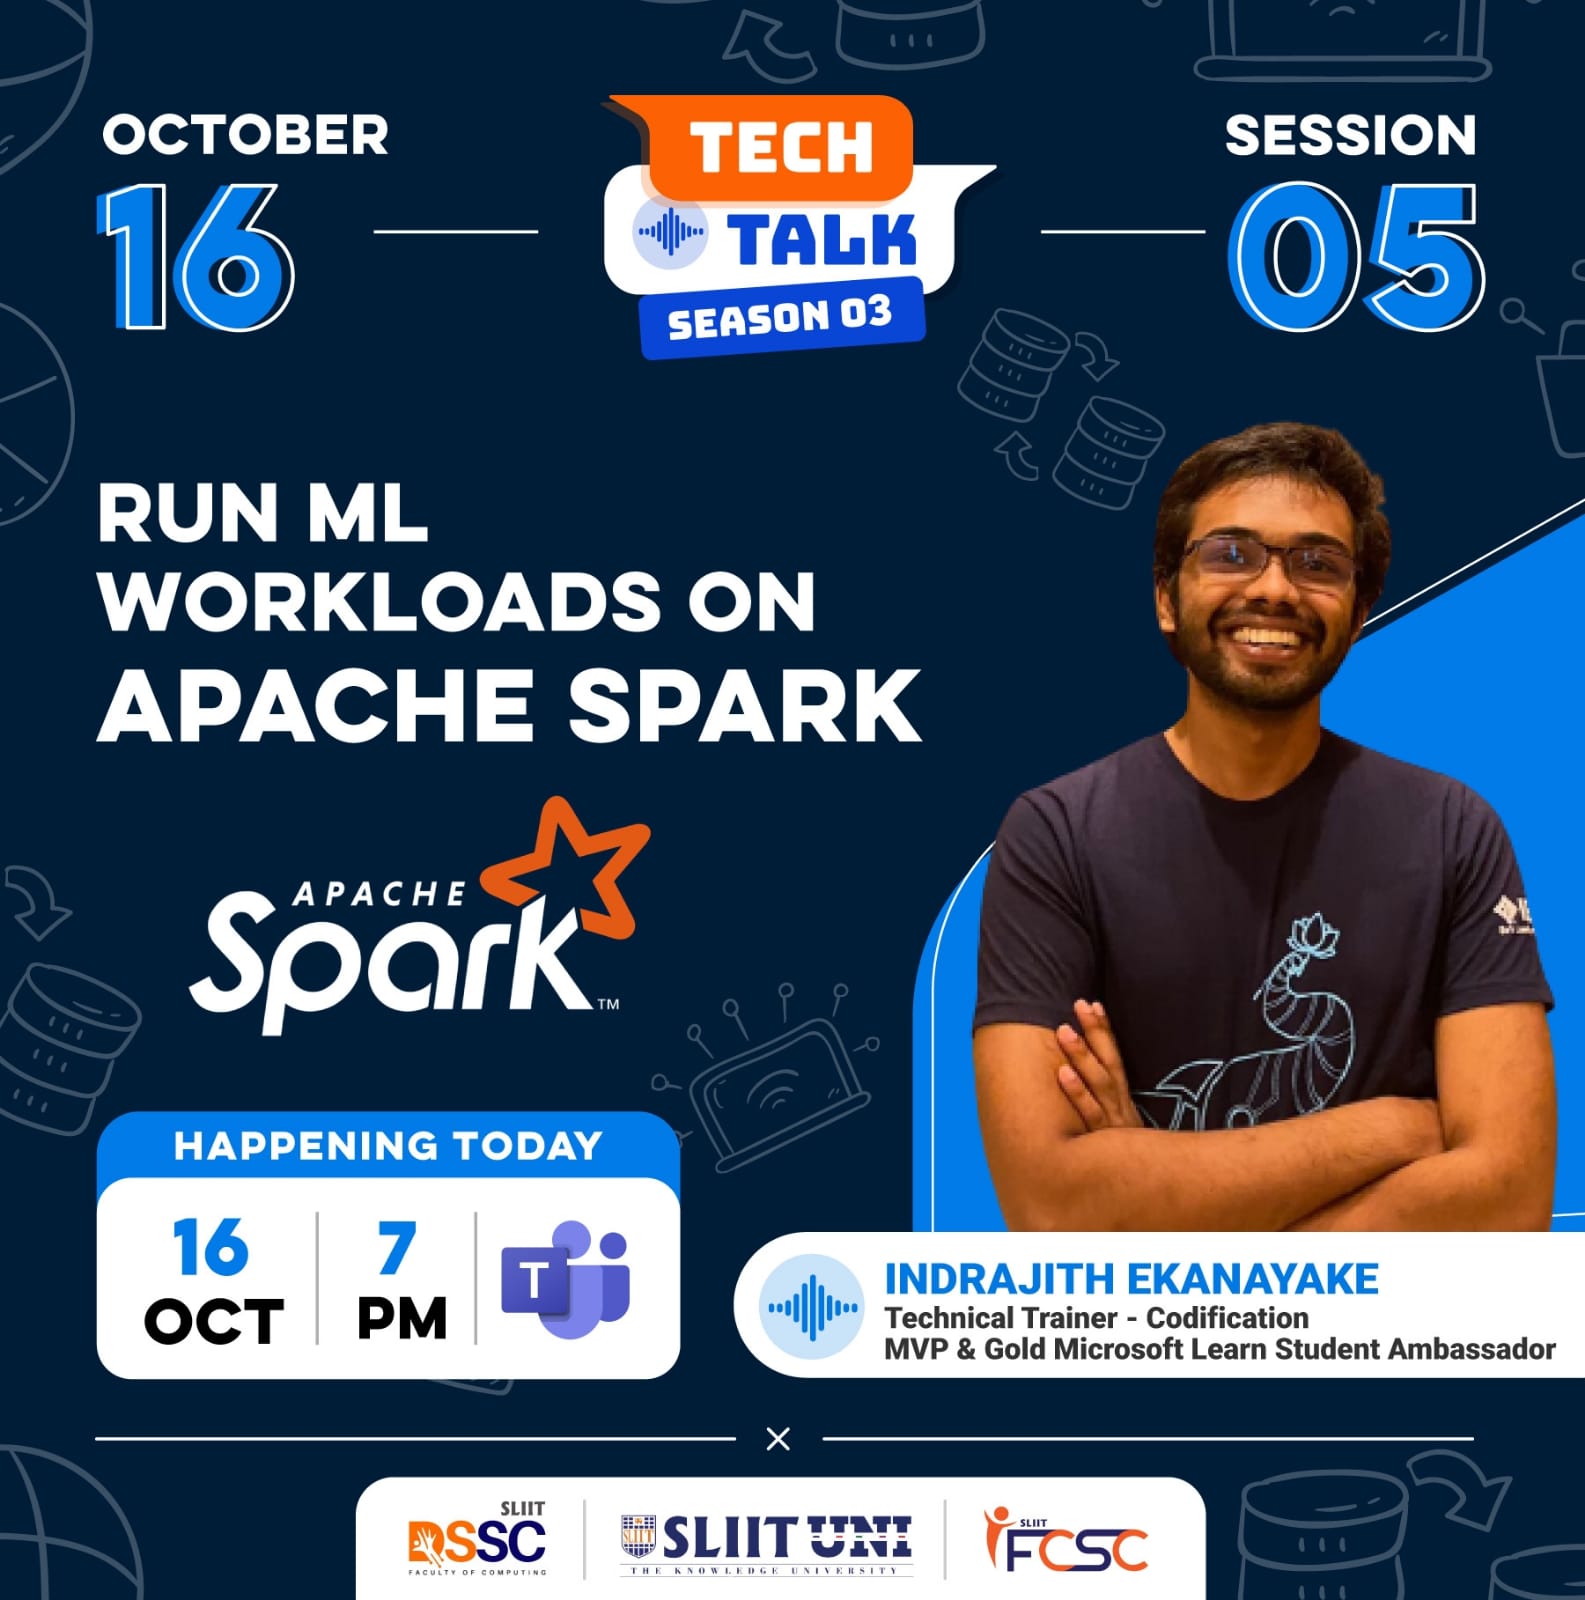 spark event at SLIIT